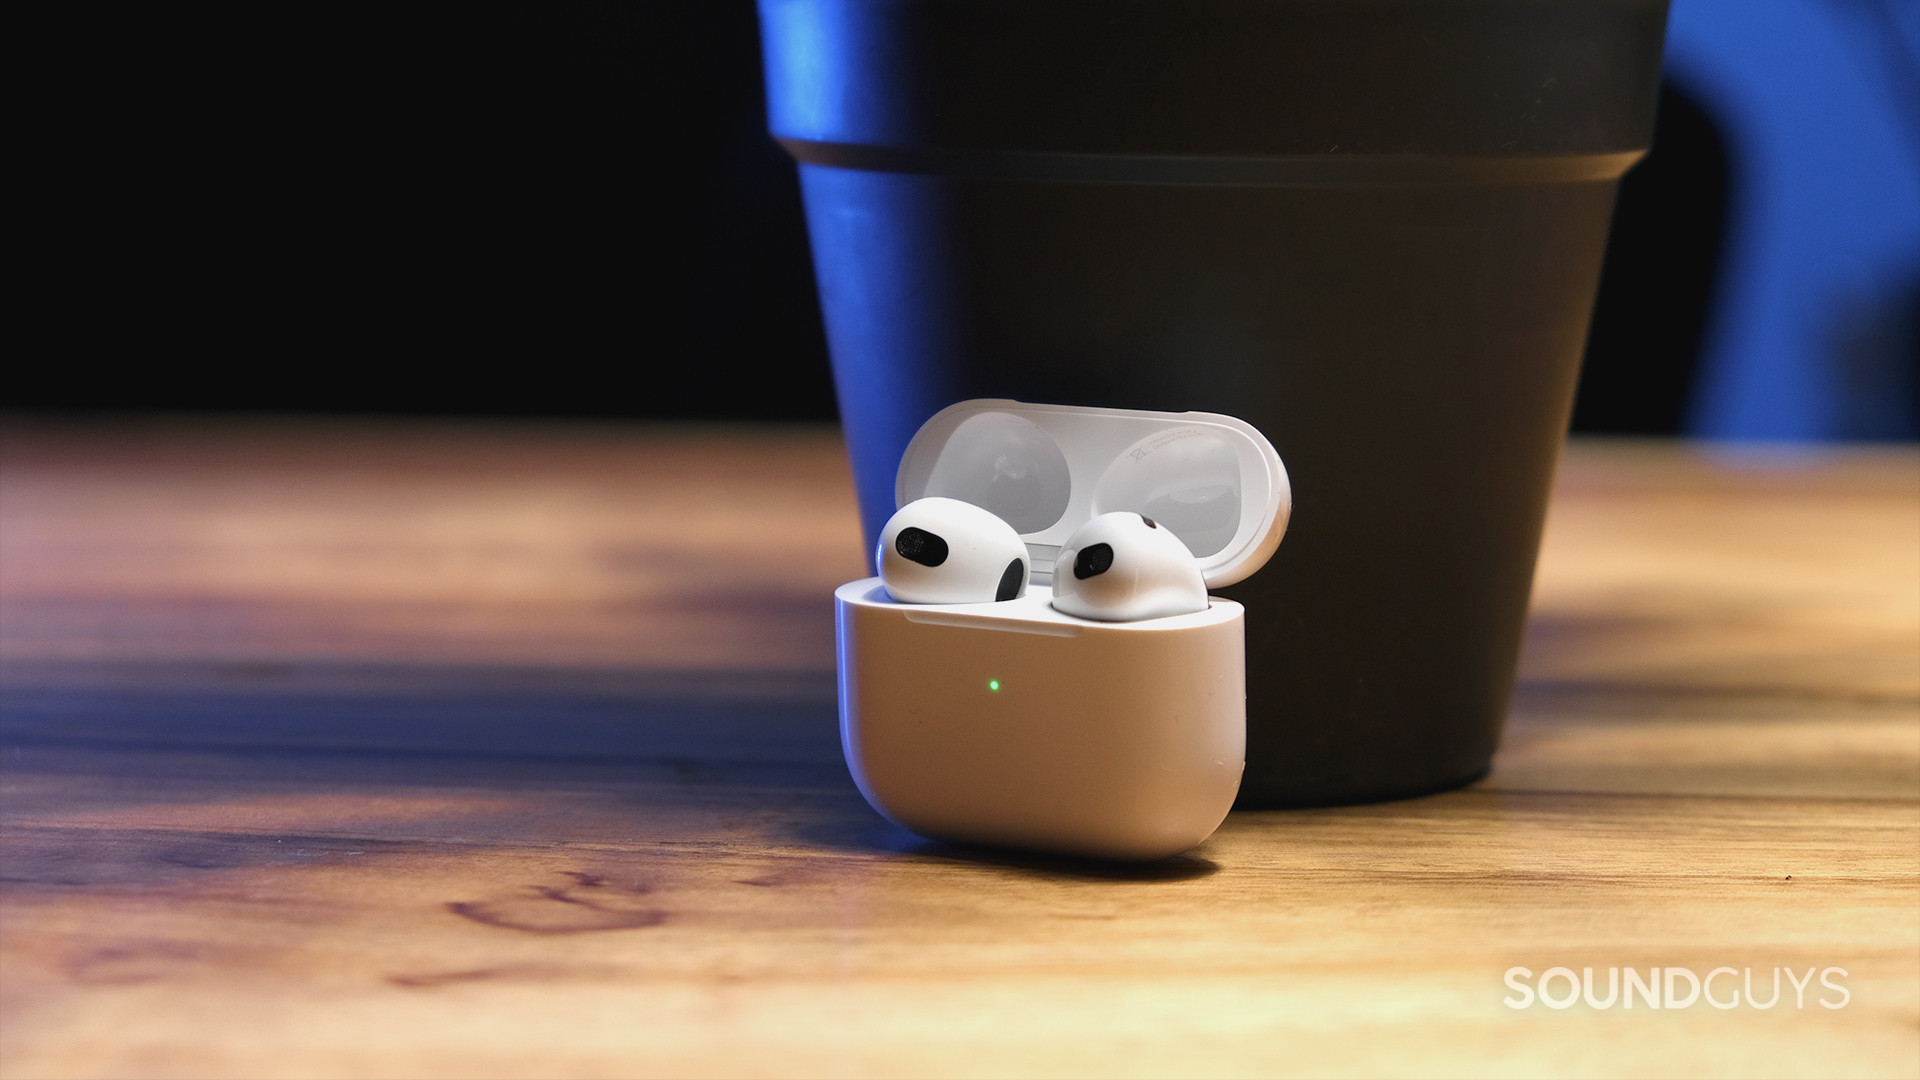 The open case of the Apple AirPods (3rd generation) holds the earbuds and sits on a wooden surface.